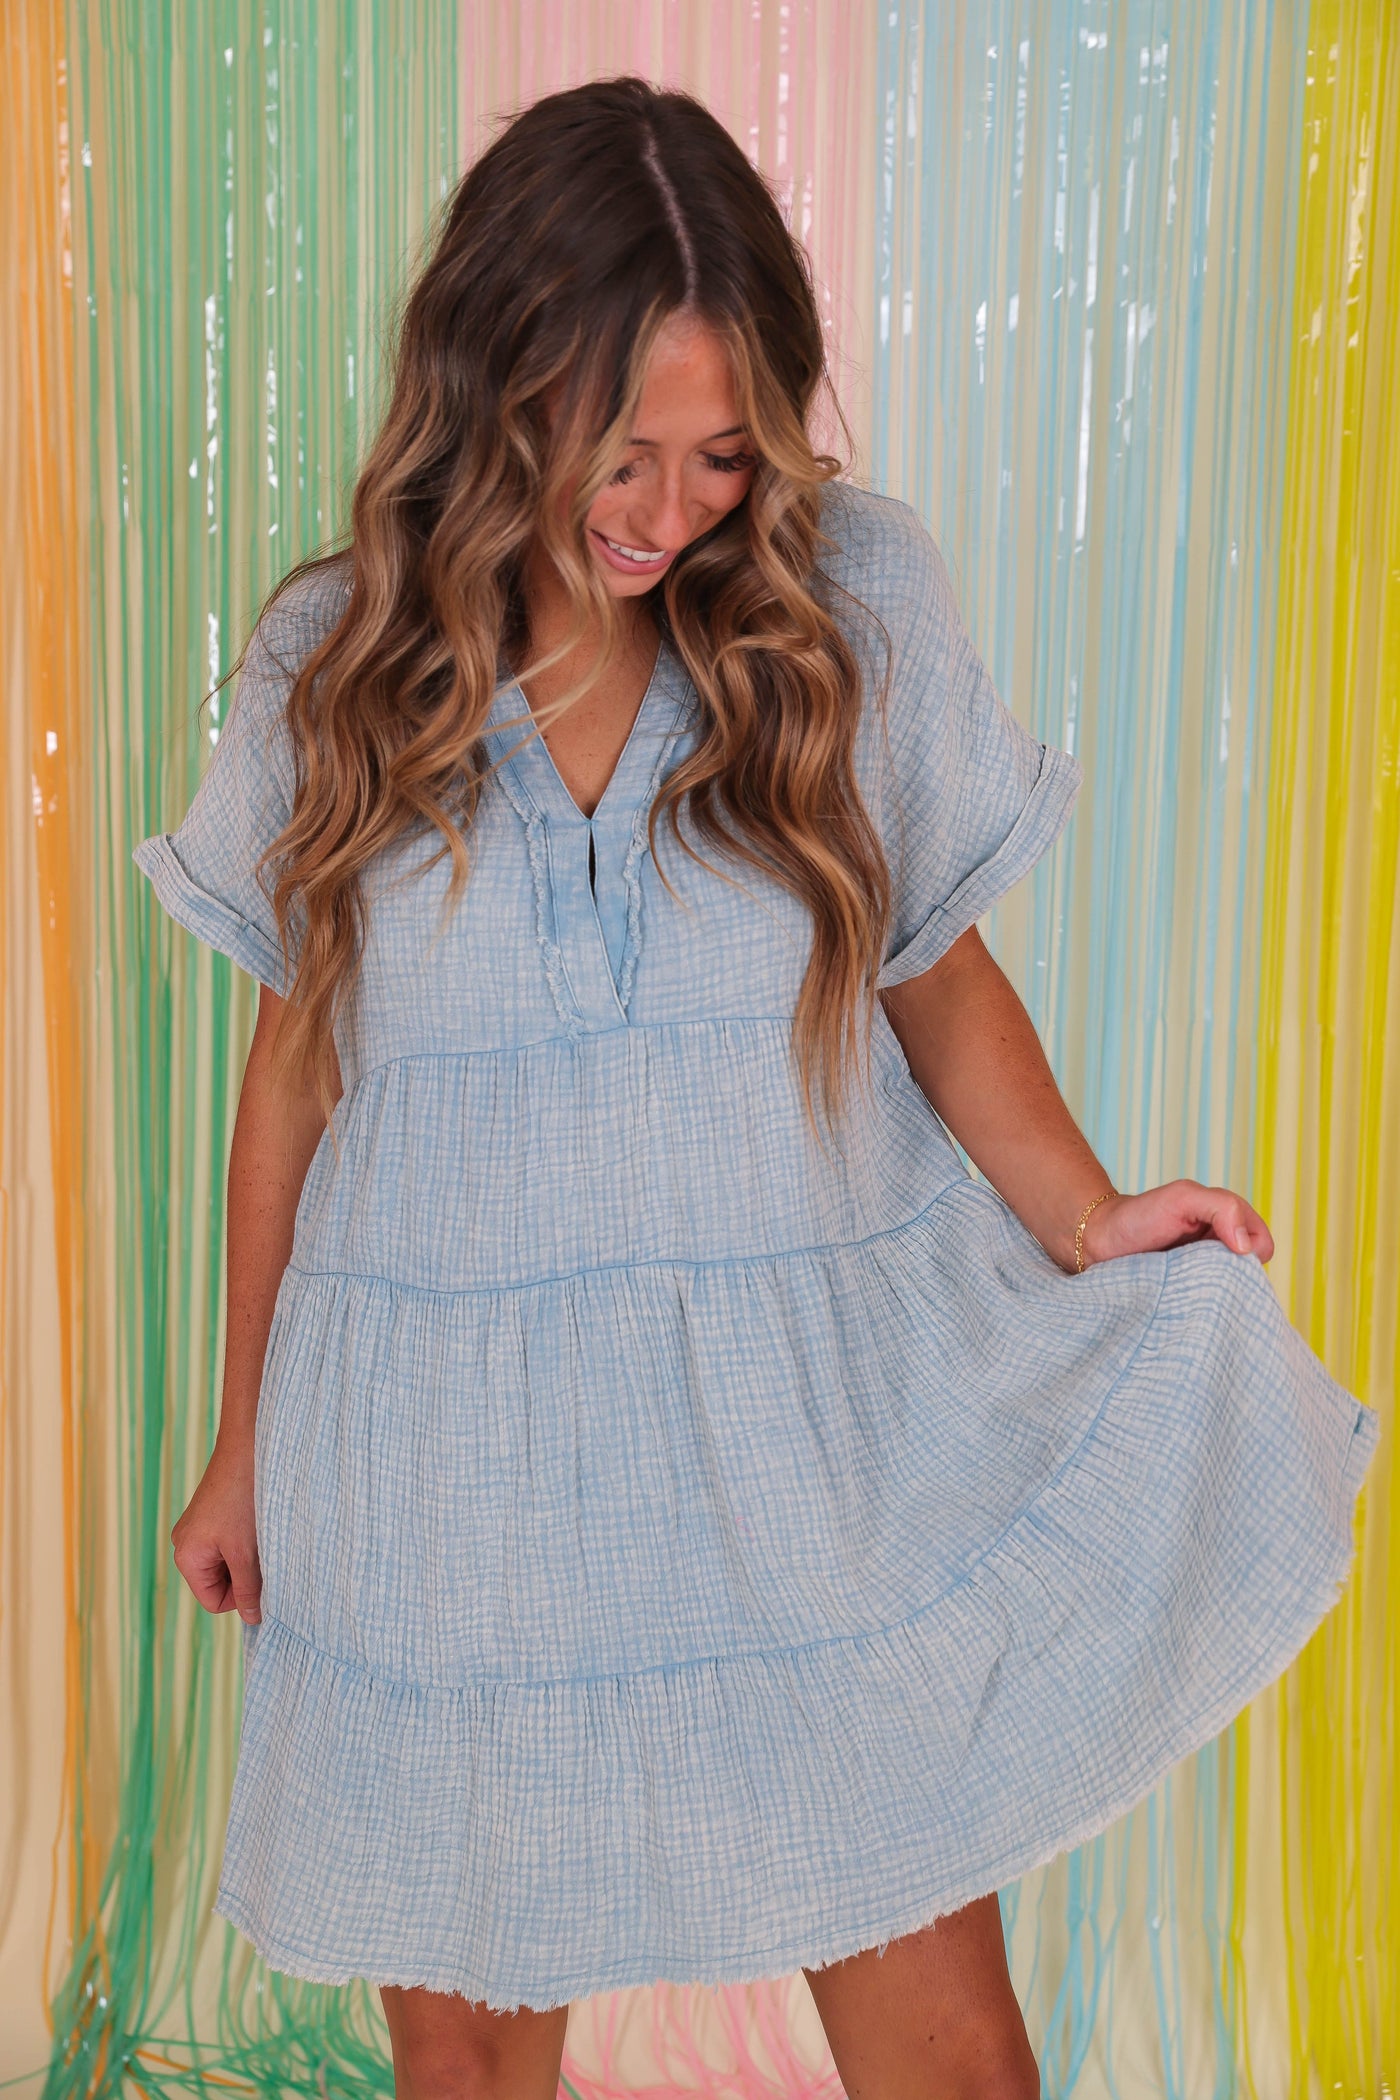 Mineral Wash Tiered Dress- Women's Oversized Dresses- Umgee Mineral Wash Tunic